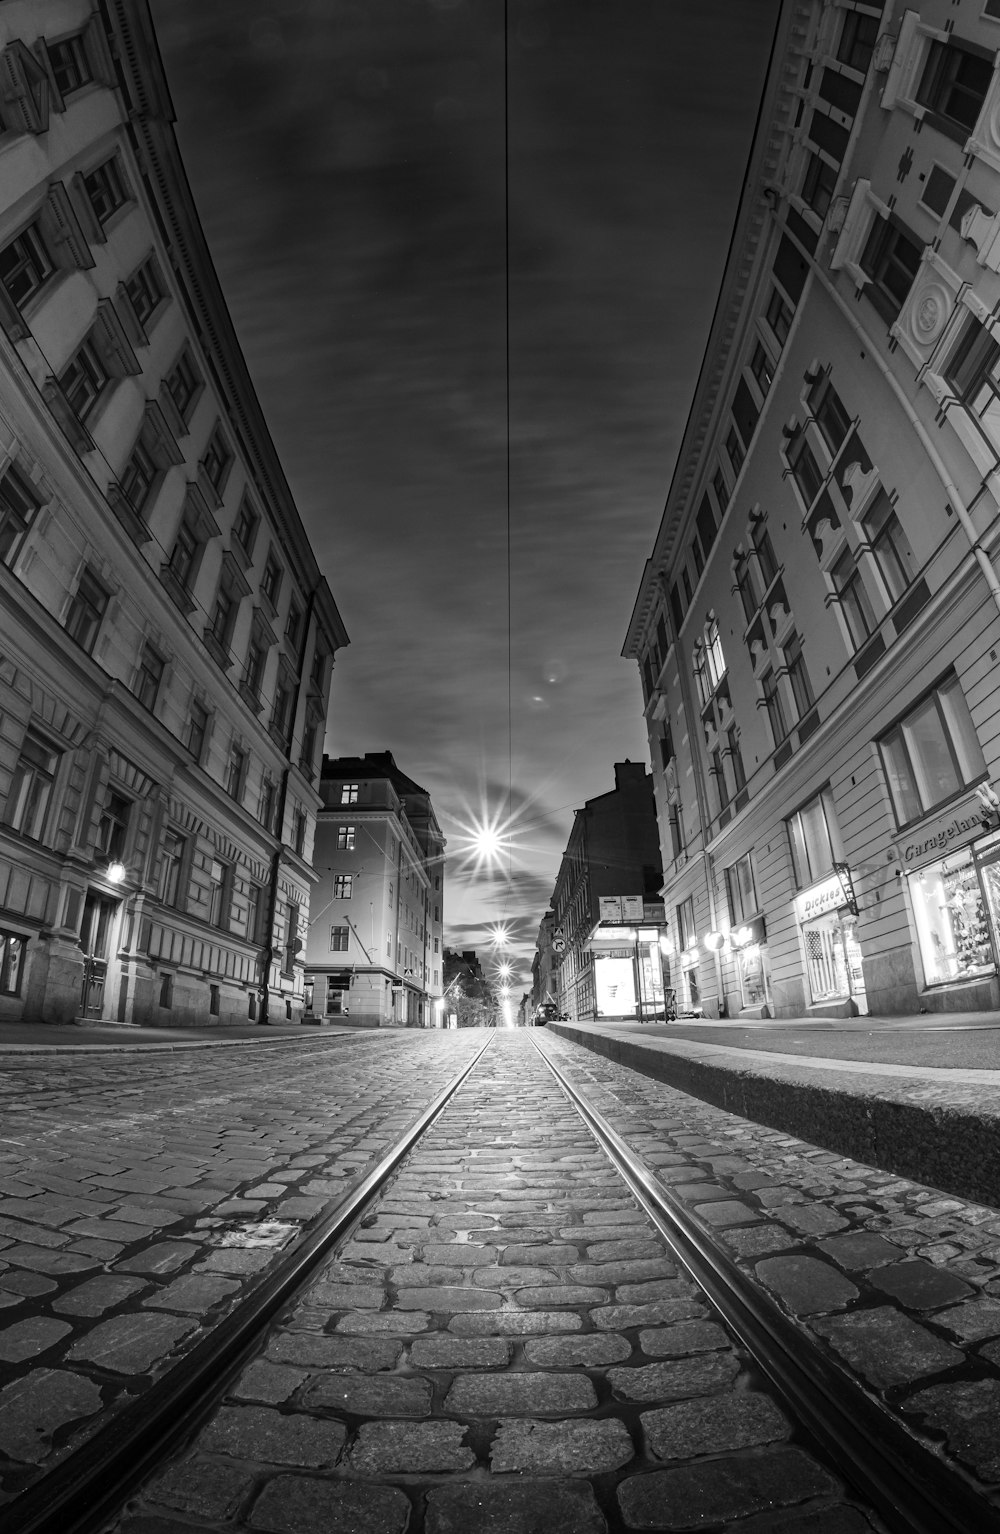 grayscale photo of a street in the middle of a city